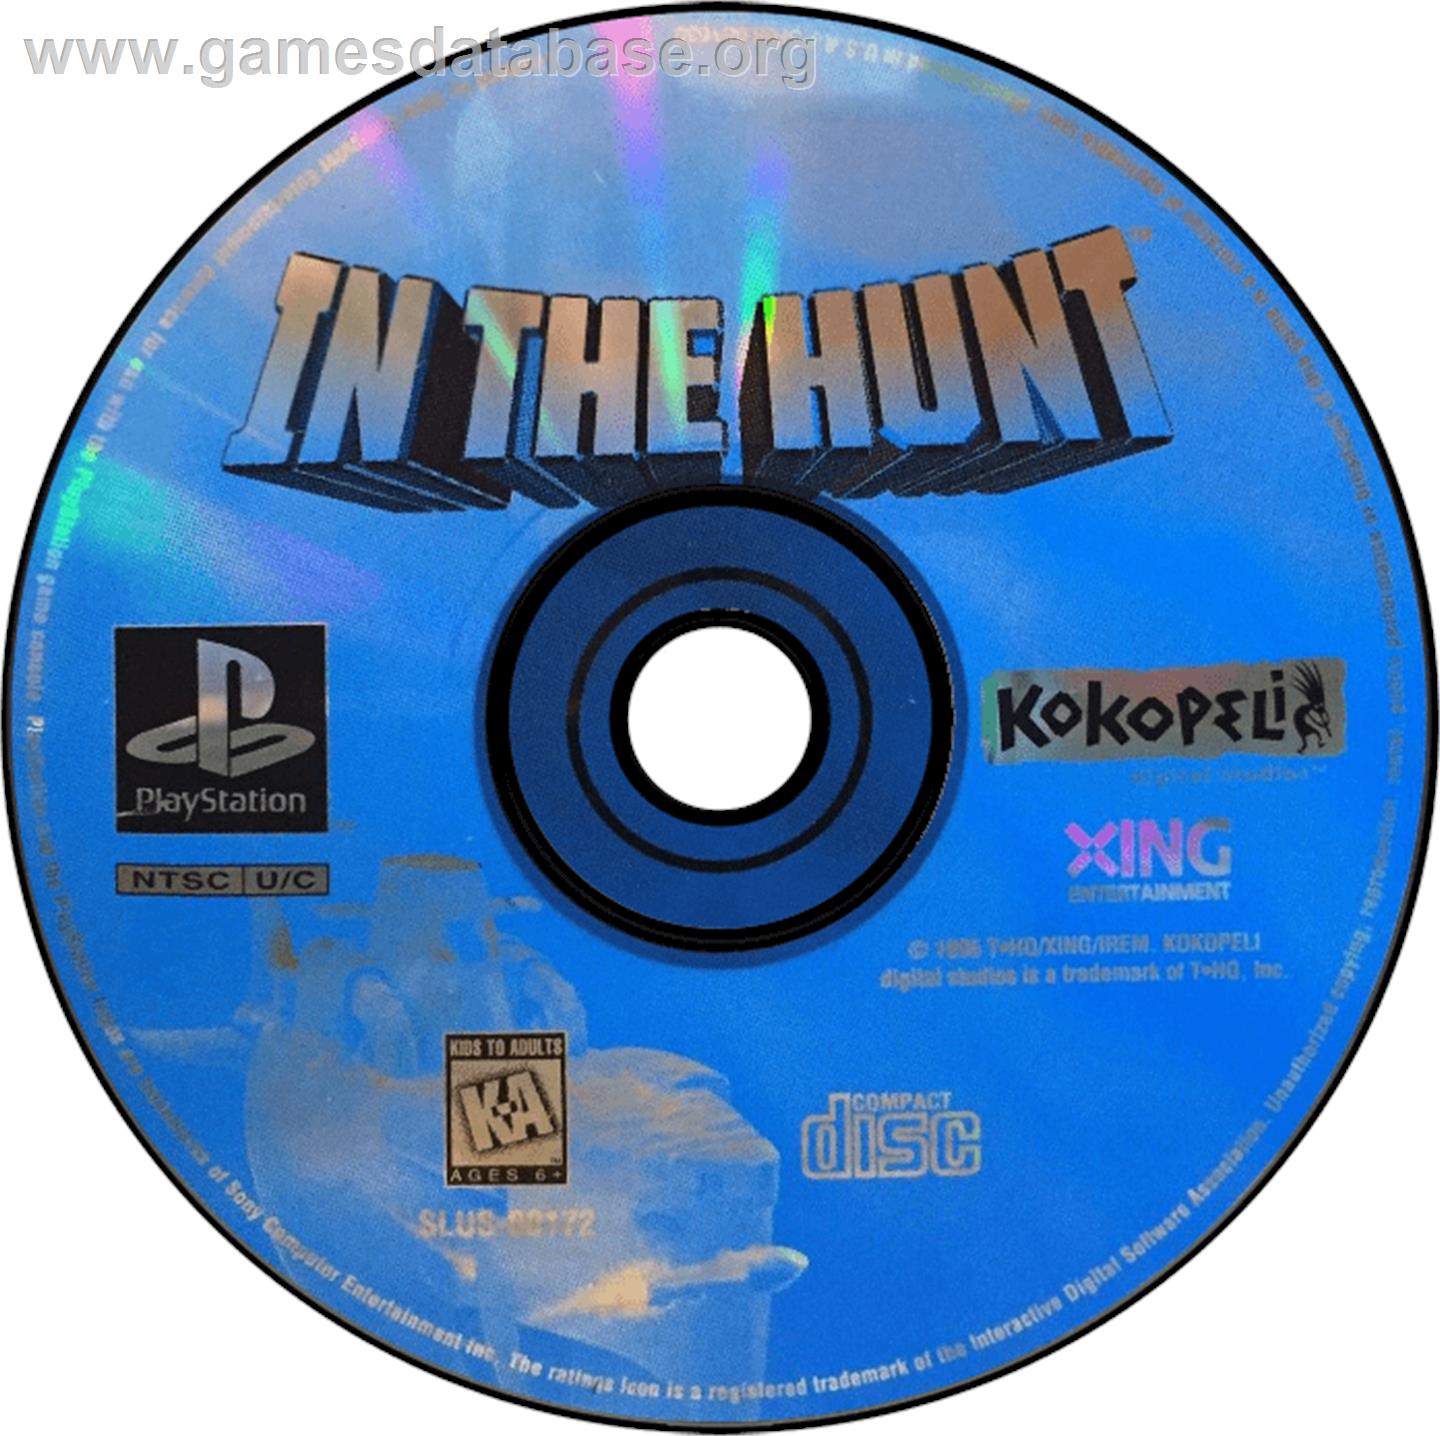 In the Hunt - Sony Playstation - Artwork - Disc